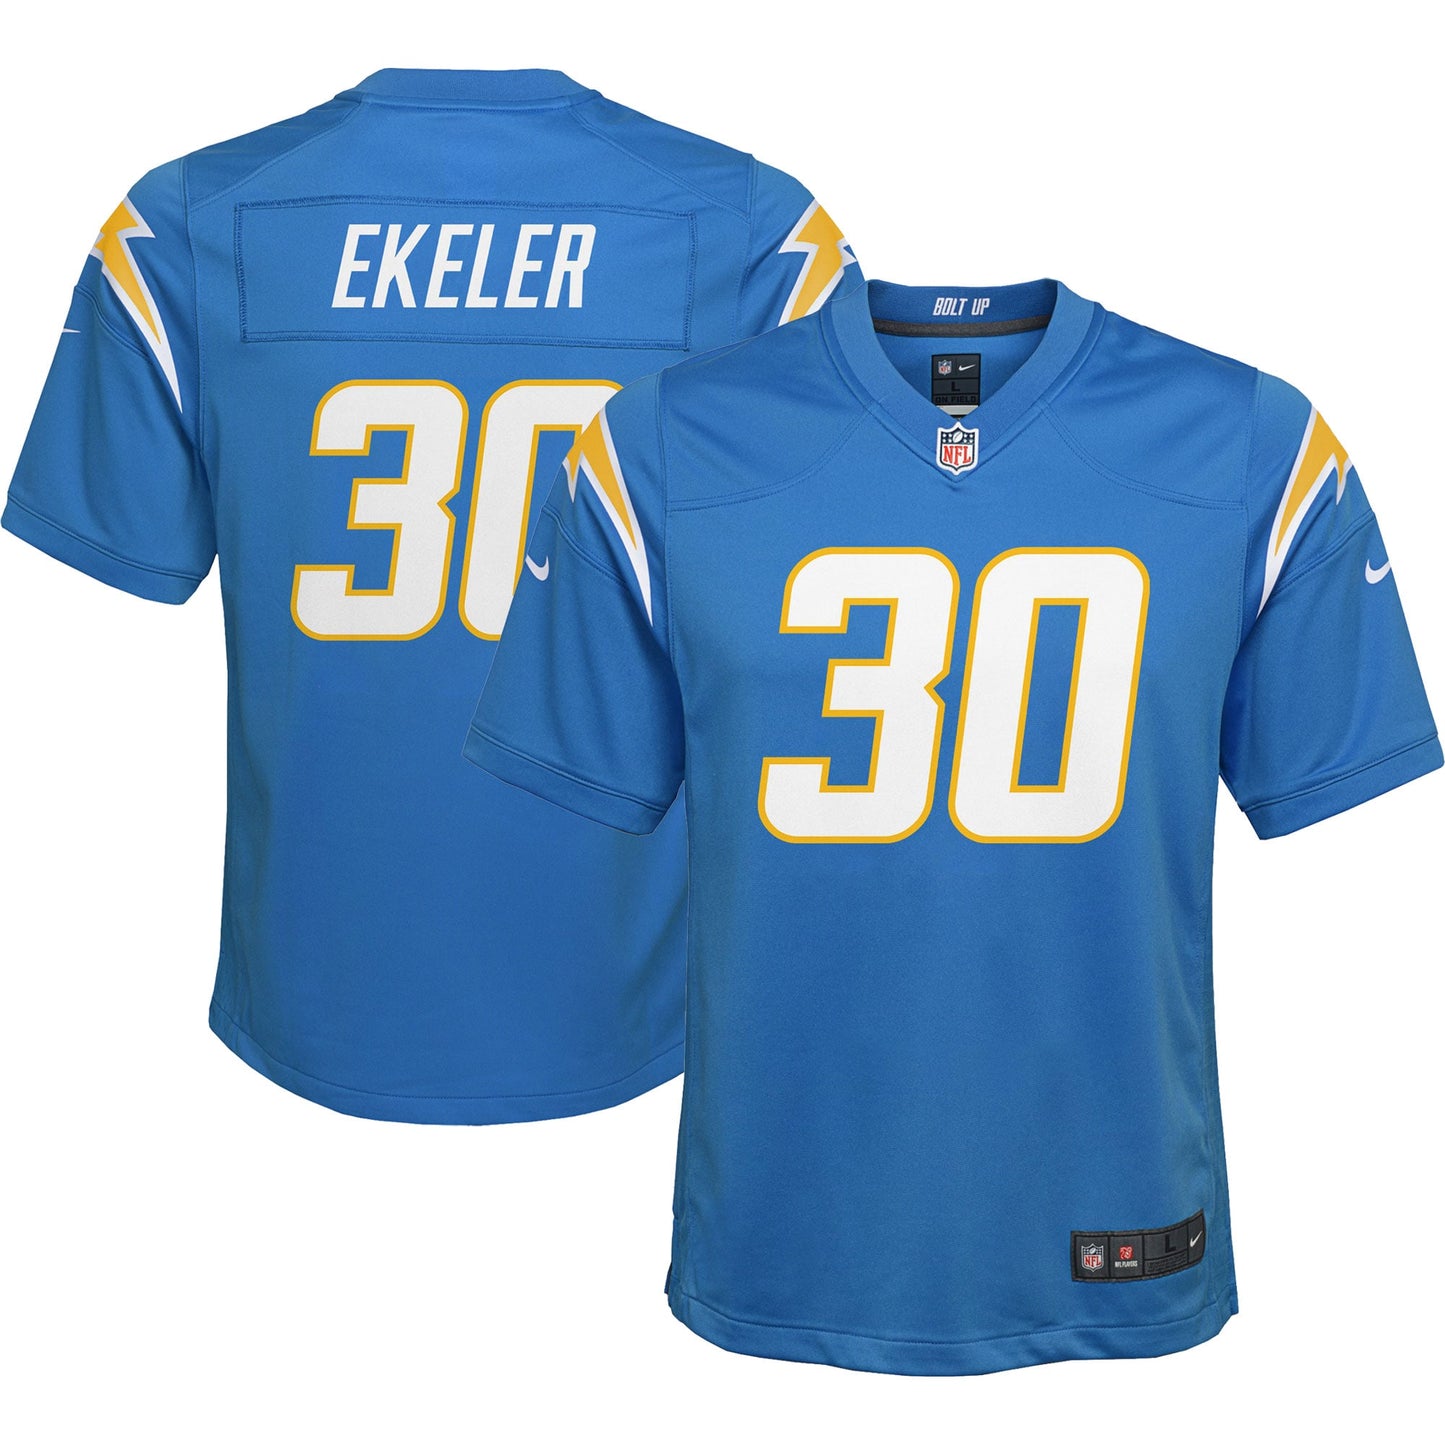 Austin Ekeler Los Angeles Chargers Nike Youth Game Jersey - Powder Blue